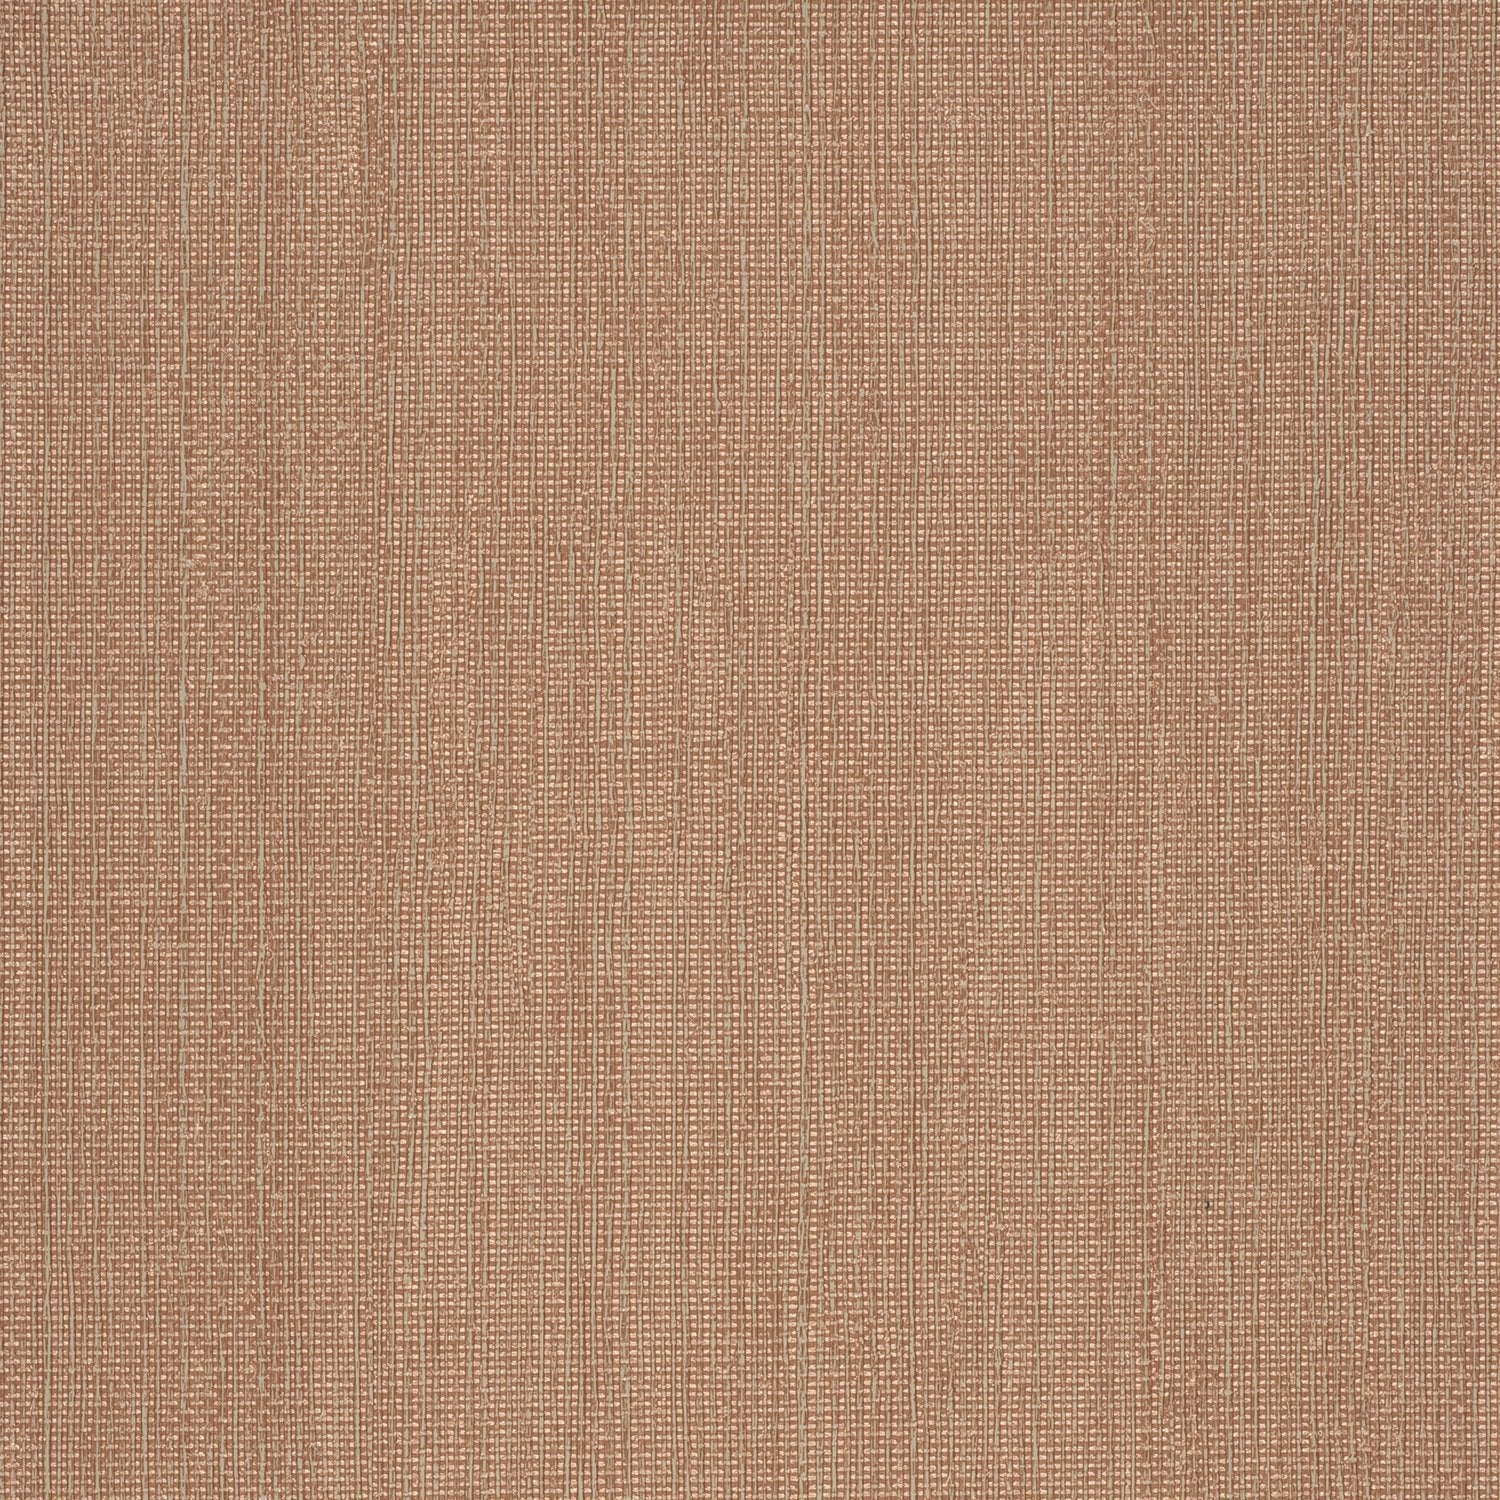 Theory - Y46448 - Wallcovering - Vycon - Kube Contract